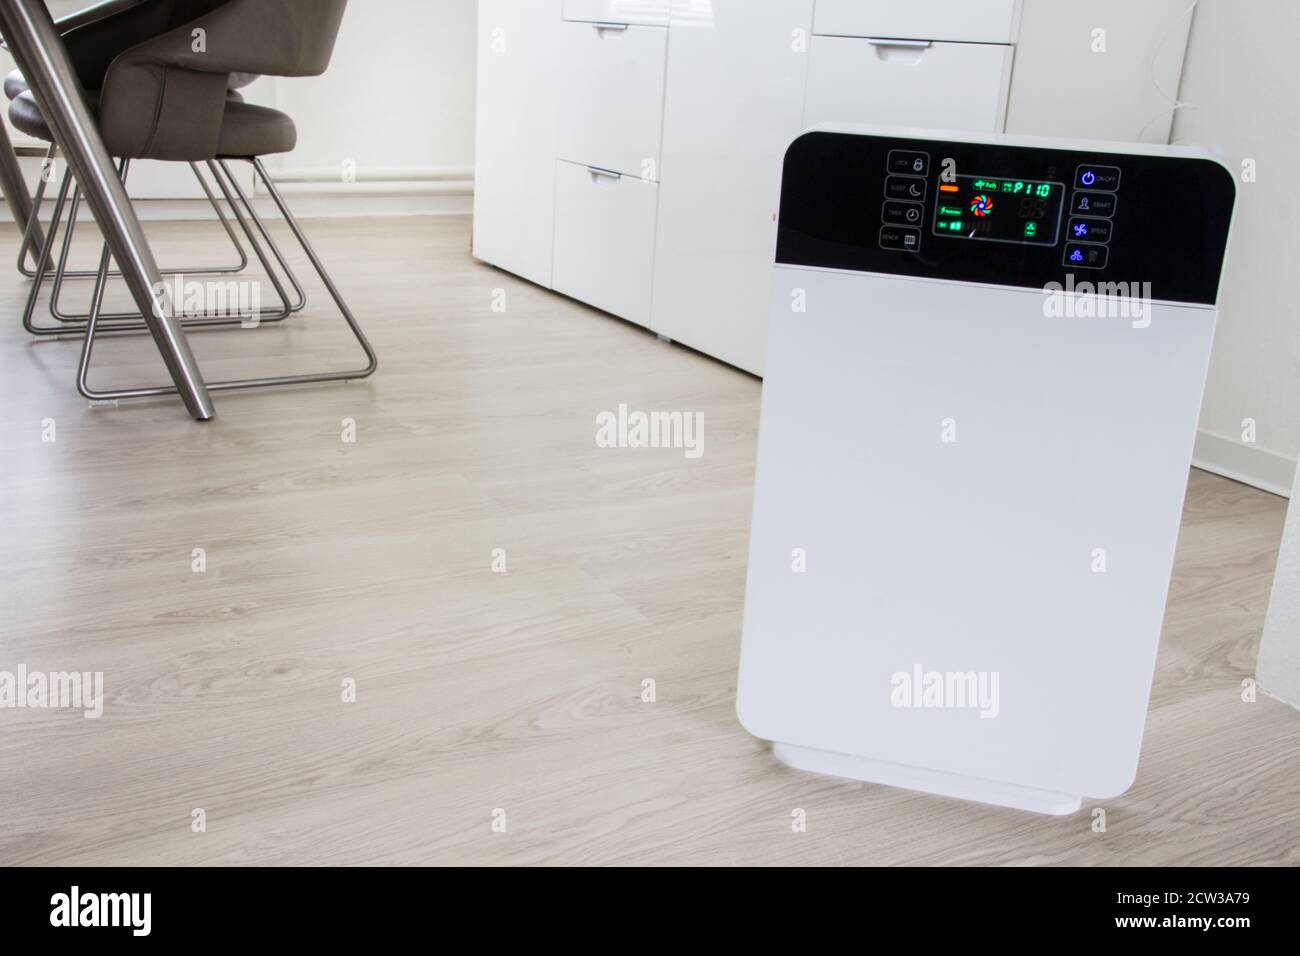 Air purifier in a living room with hepa filter Stock Photo